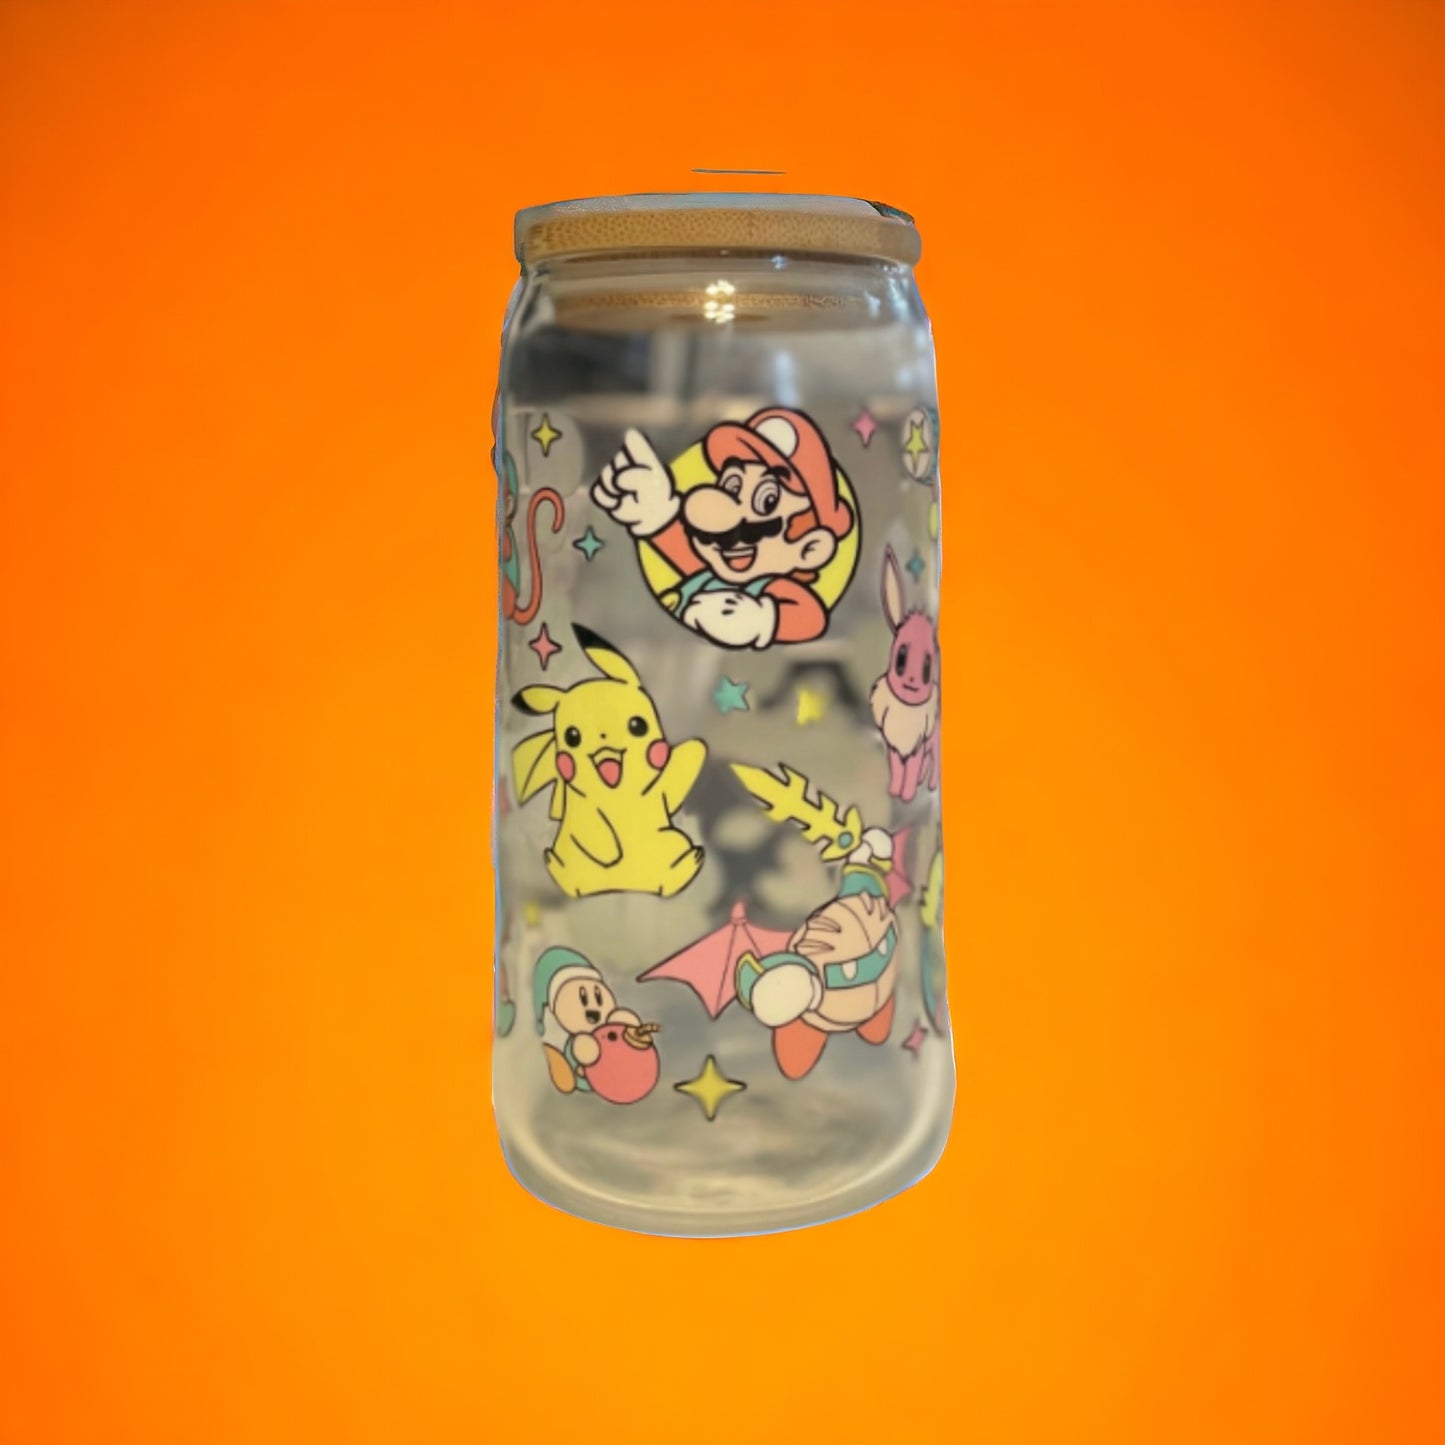 Nintendo Smash Bro. Character 16oz. Glass Cans with Straw, Glass Can, Beer Can, Glass Cup with Straw and Bamboo Lid, Donkey Kong Cup, Pikachu Cup, Mario and Luigi Cup, Kirby Cup